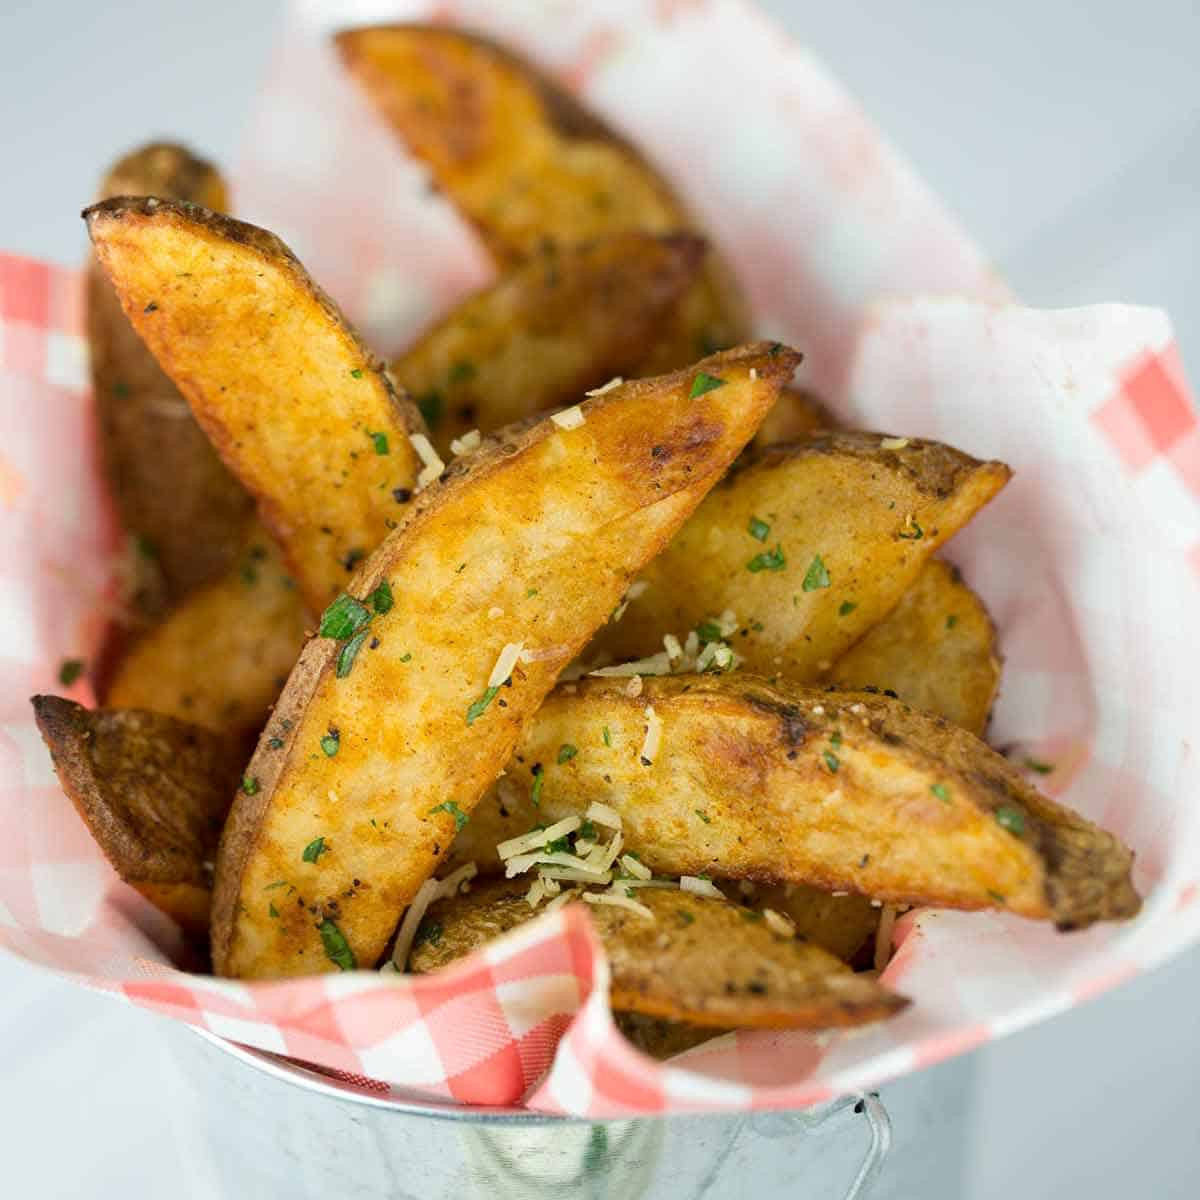 Oven Potato Wedges
 Oven Baked Potato Wedges with Dipping Sauce